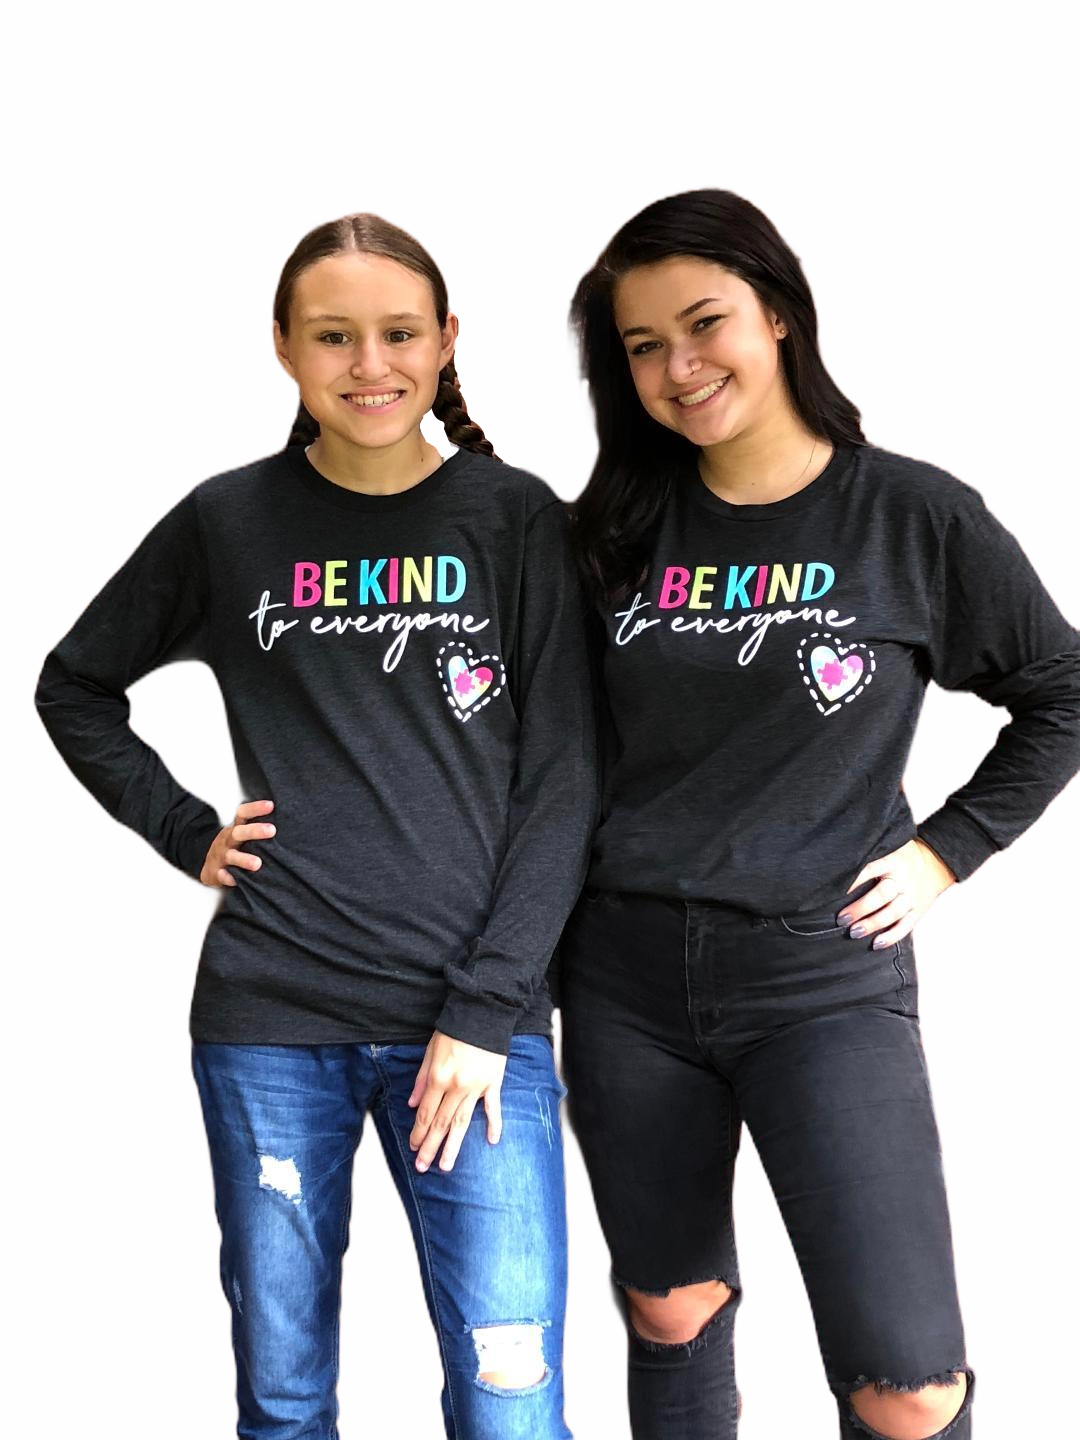 Jordyn and Sarah in our long-sleeved Original Jordyn Be Kind to Everyone® t-shirts.